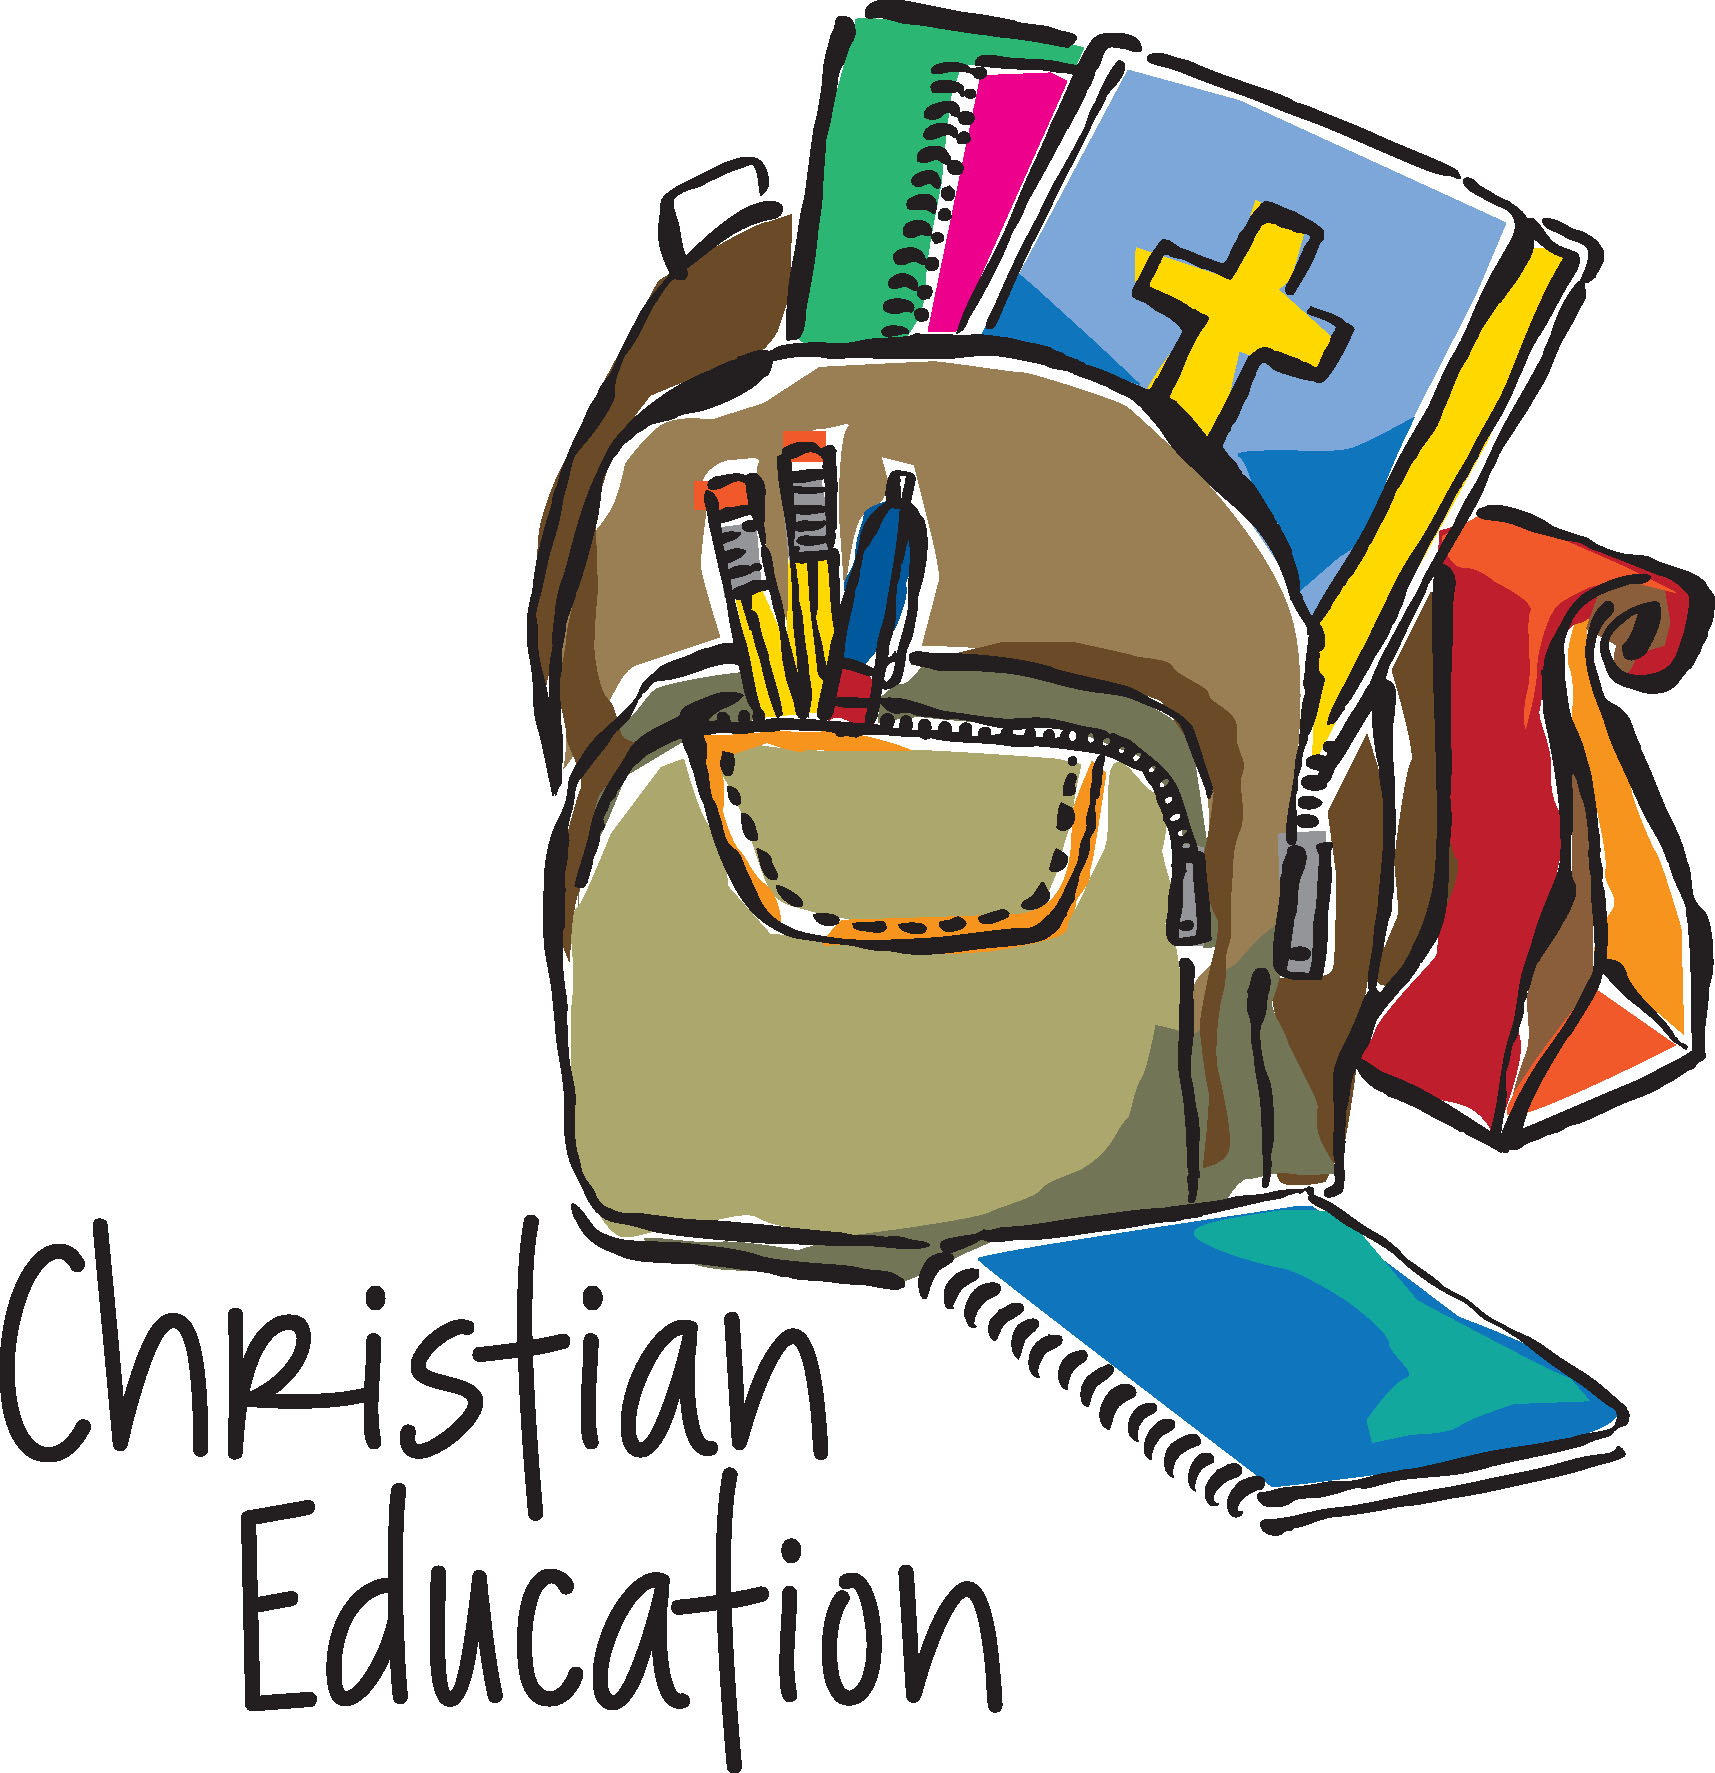 clipart related to education - photo #14